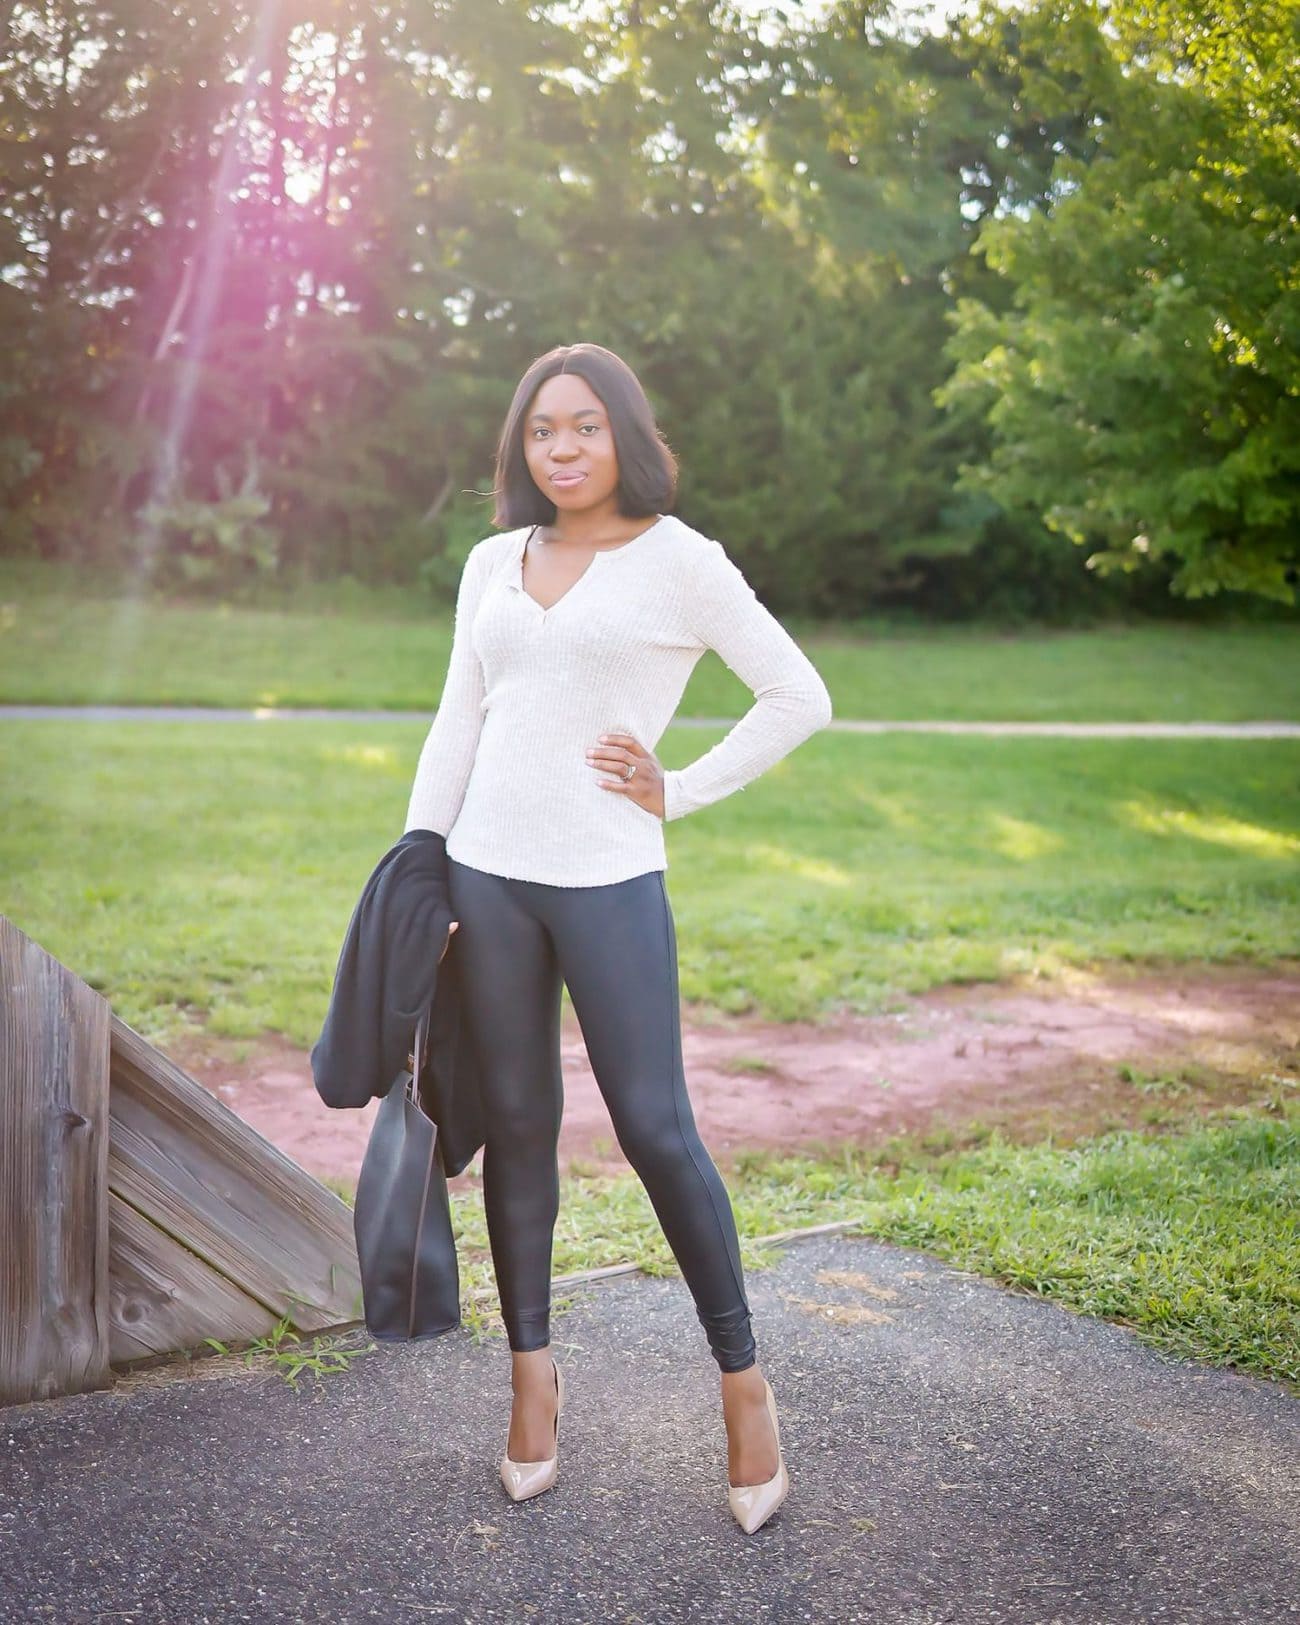 2020 Nordstrom Anniversary Sale blogger picks including the super hyped Spanx faux leather leggings and Barefoot Dreams CozyChic cardigan.